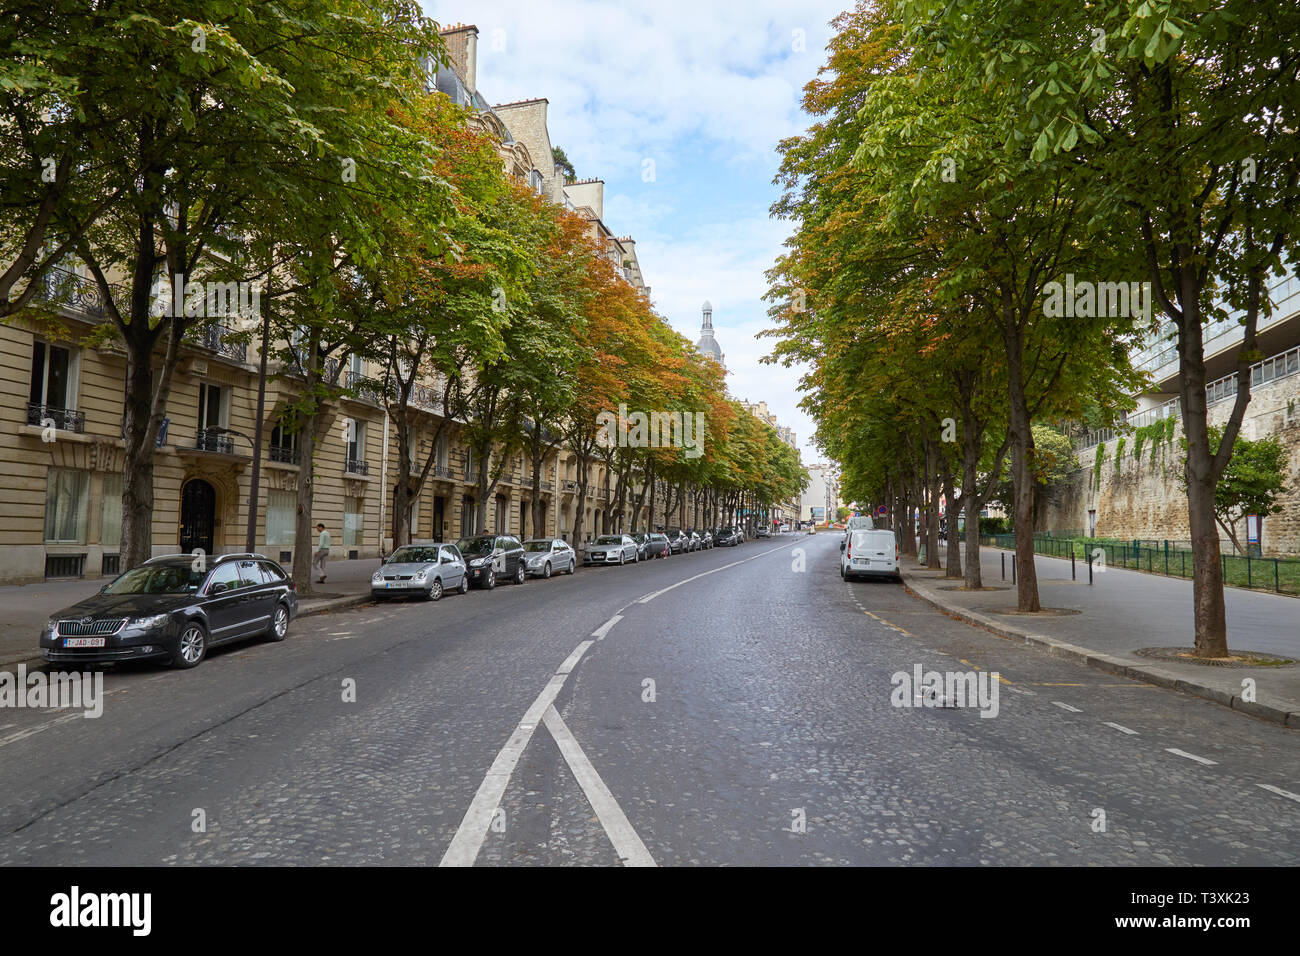 PARIS, FRANCE - JULY 23, 2017: Empty street with trees and car parked in summer in Paris, France Stock Photo